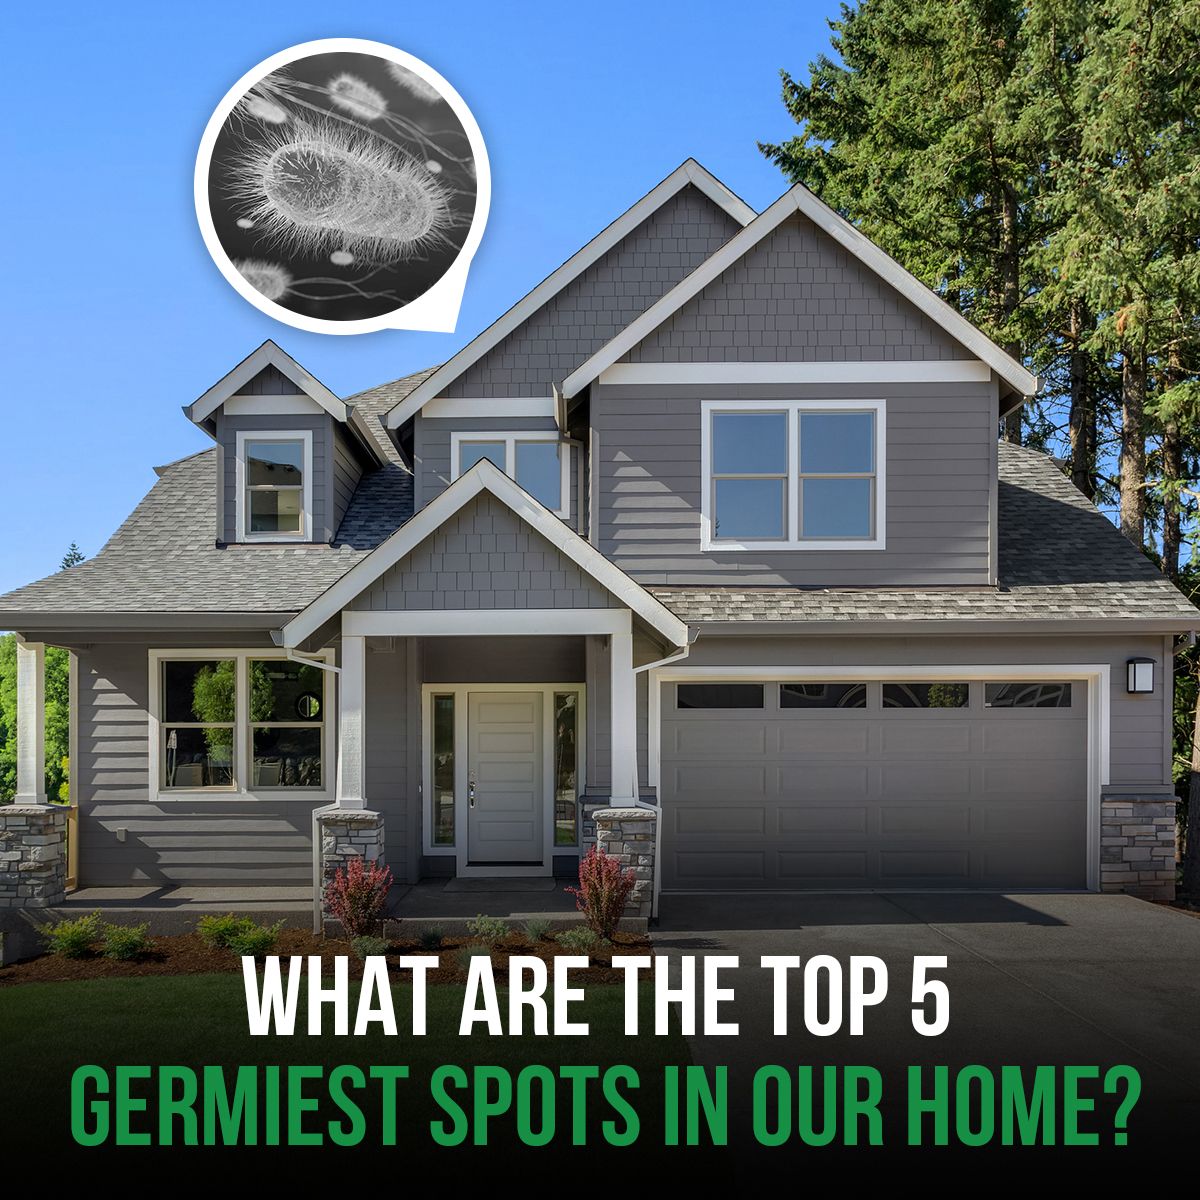 What Are the Top 5 Germiest Spots in Our Home?